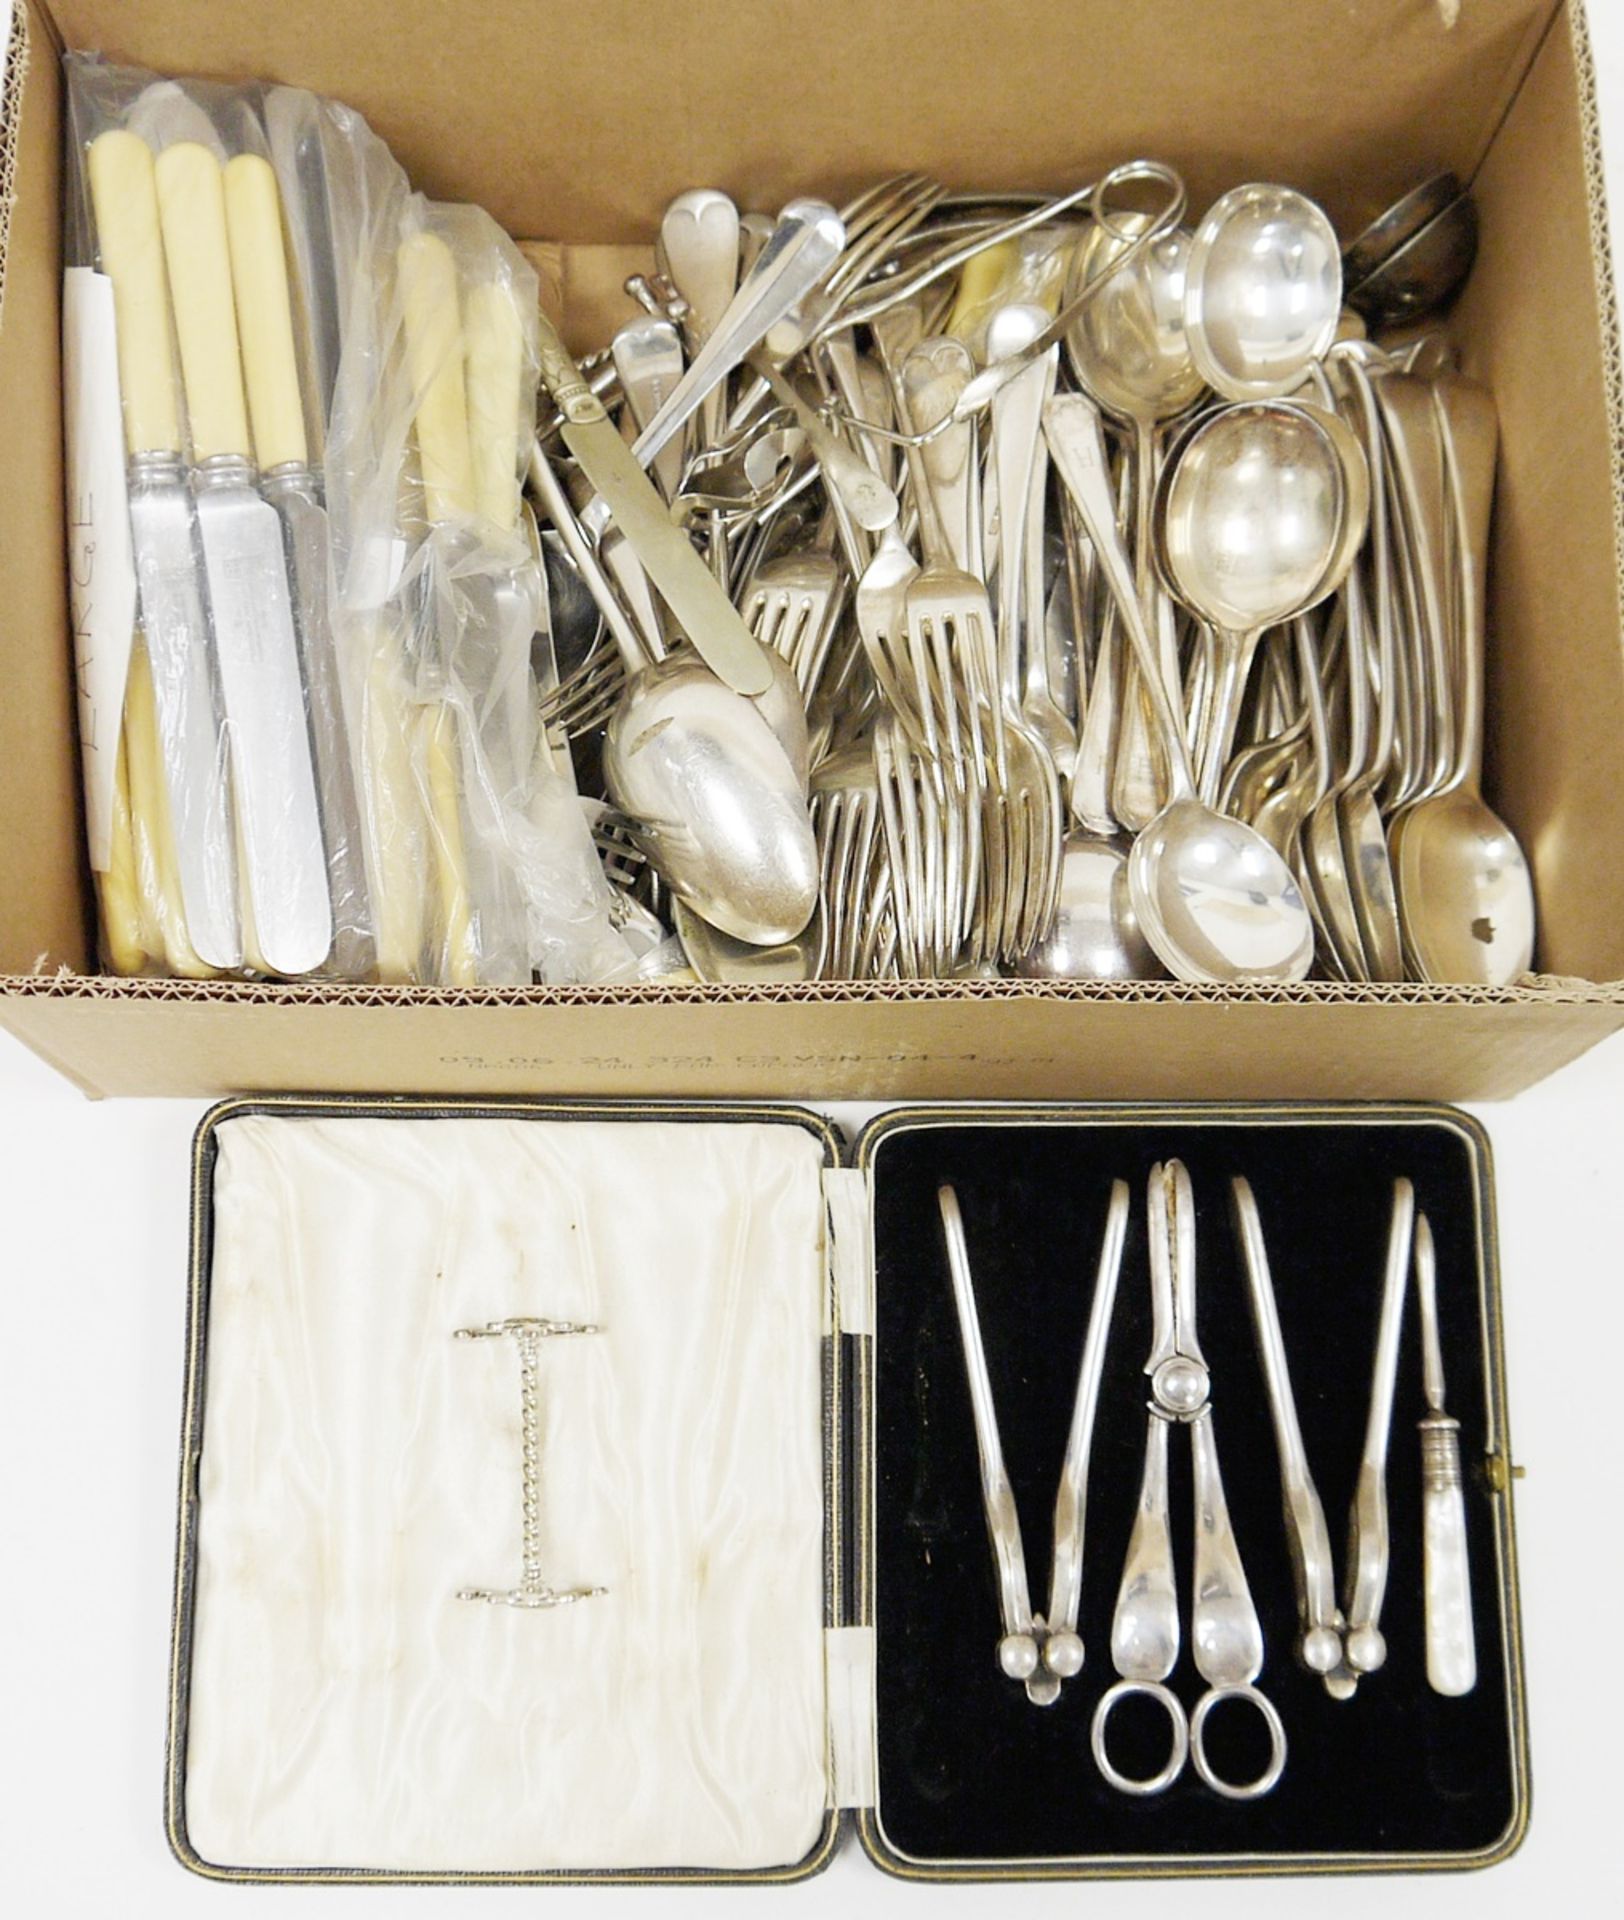 Large assortment of silver plated flatware including spoons, forks, other items including a pair - Image 2 of 2